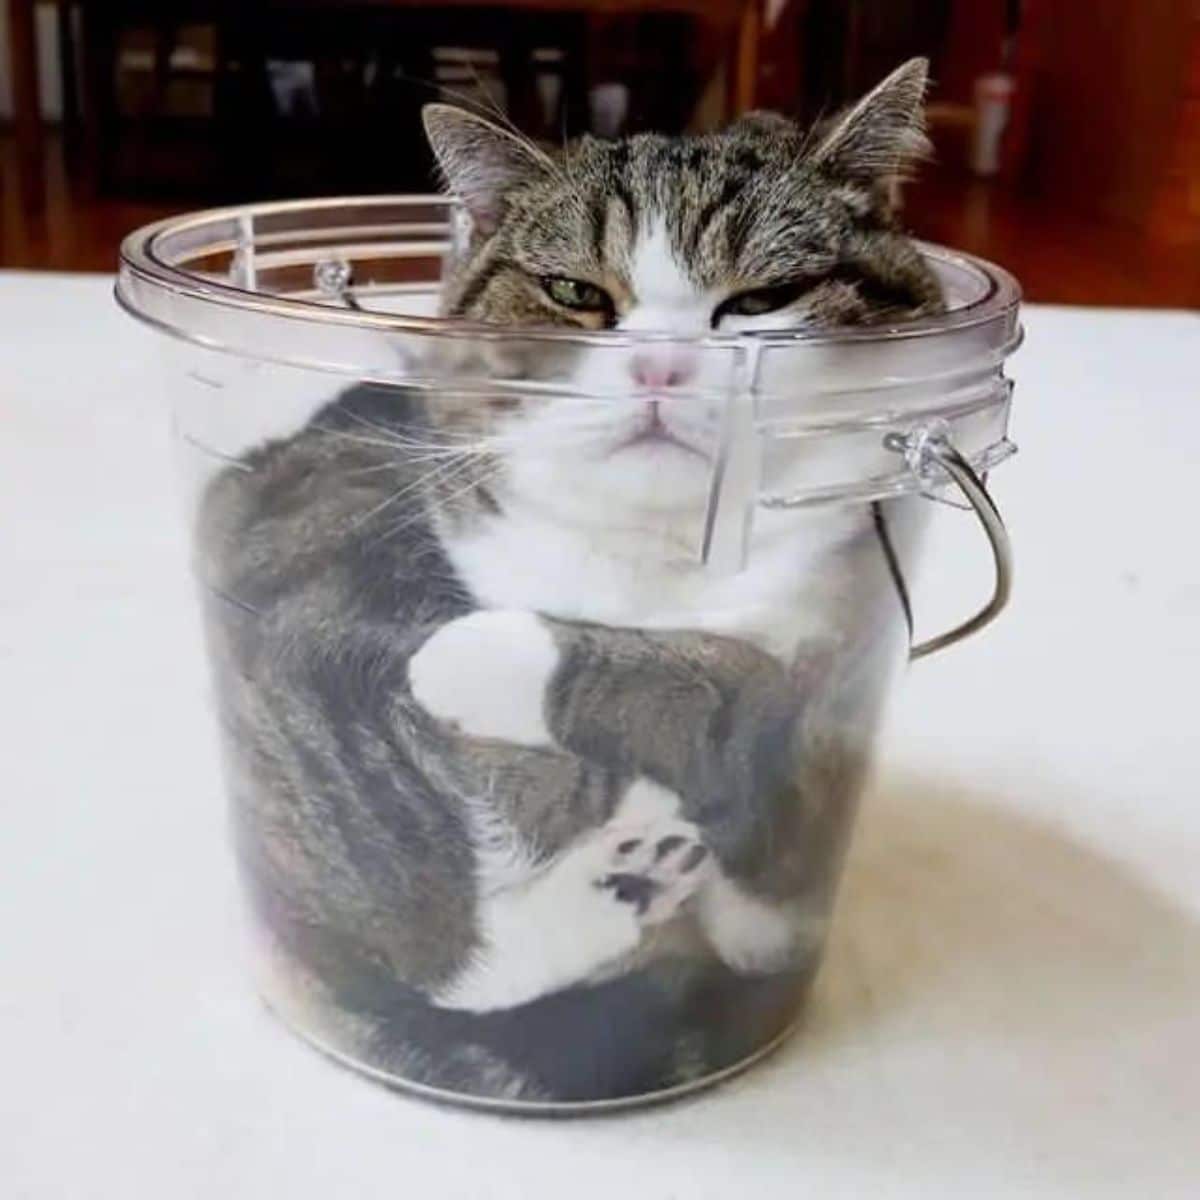 grey and white tabby cat inside a glass container